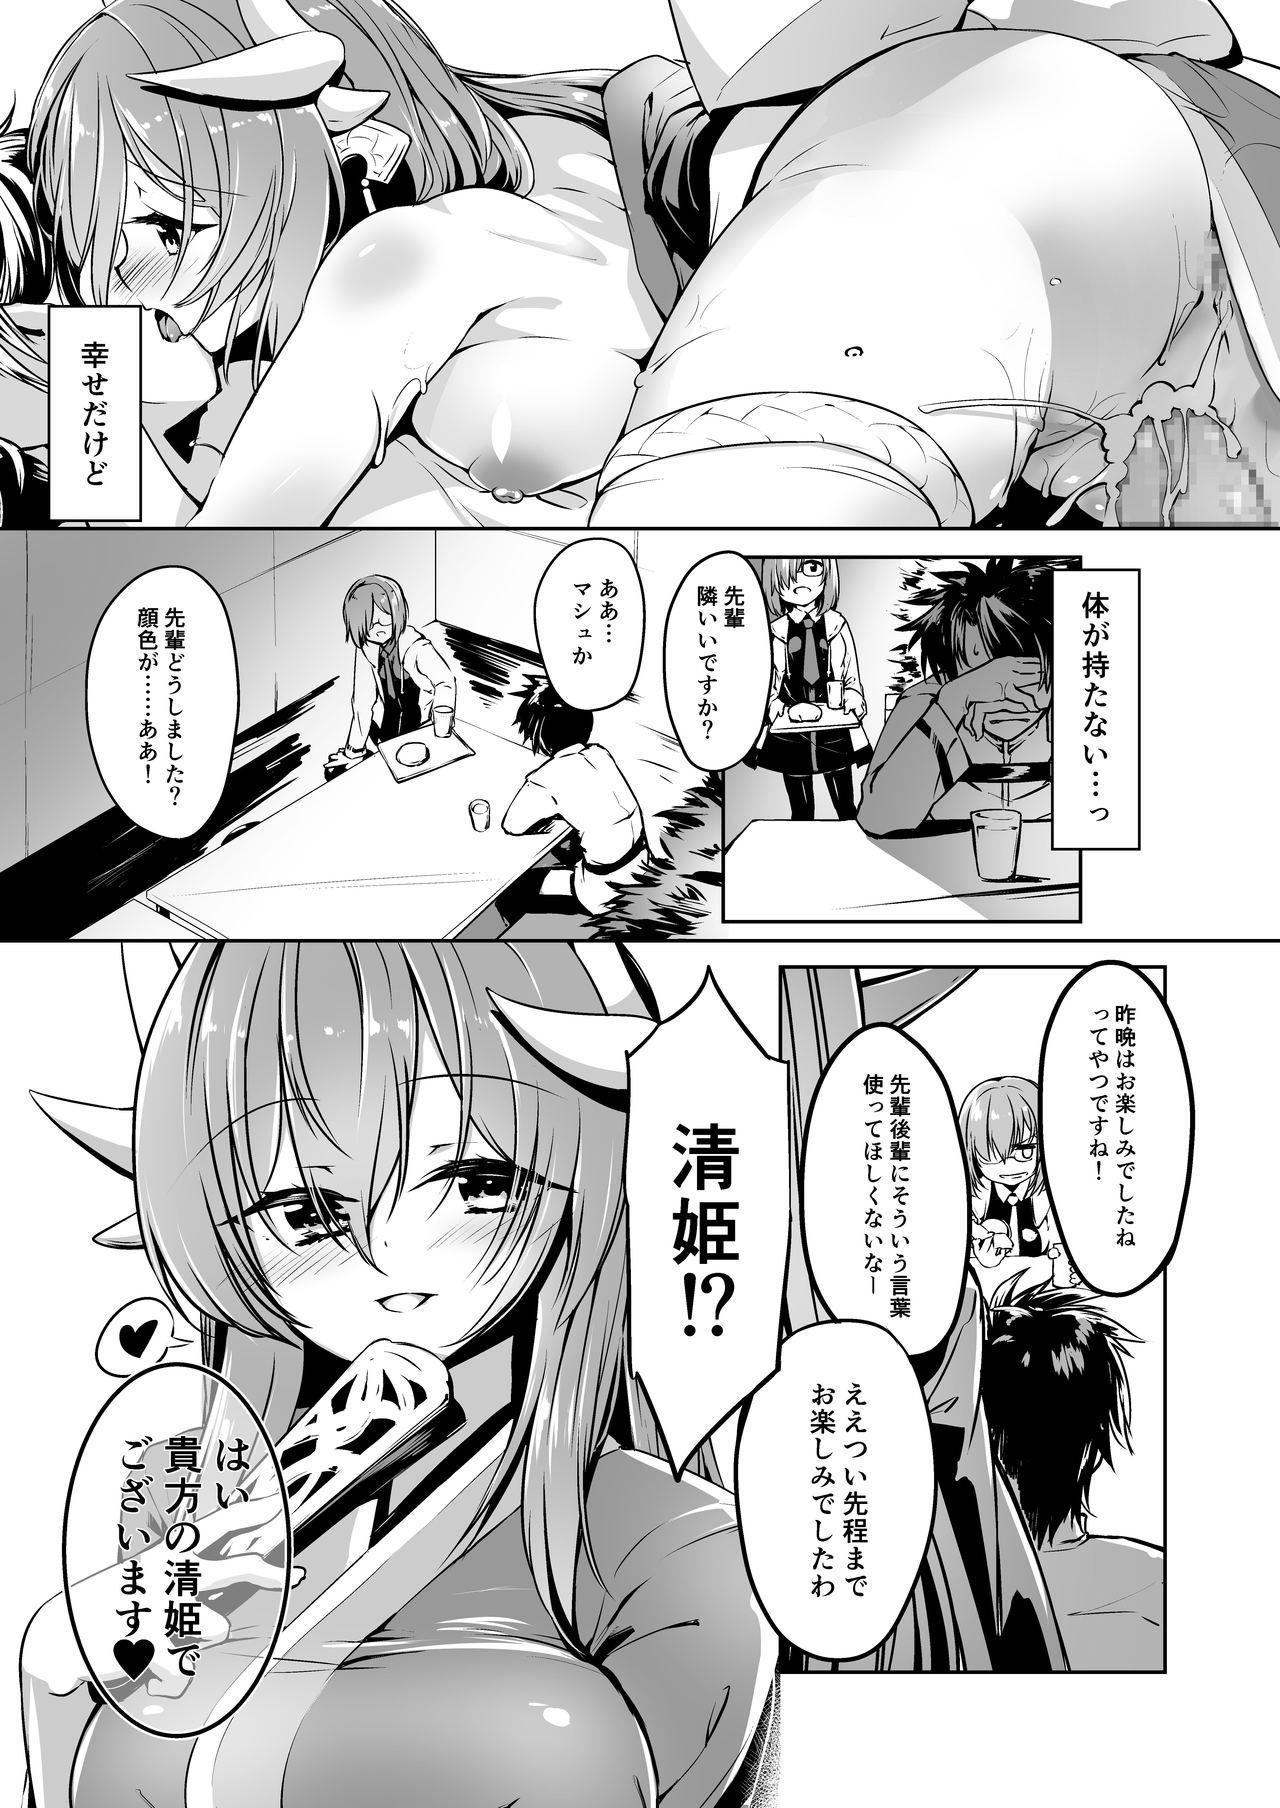 Bucetuda Kiyohime Lovers vol. 02 - Fate grand order Arabic - Page 6